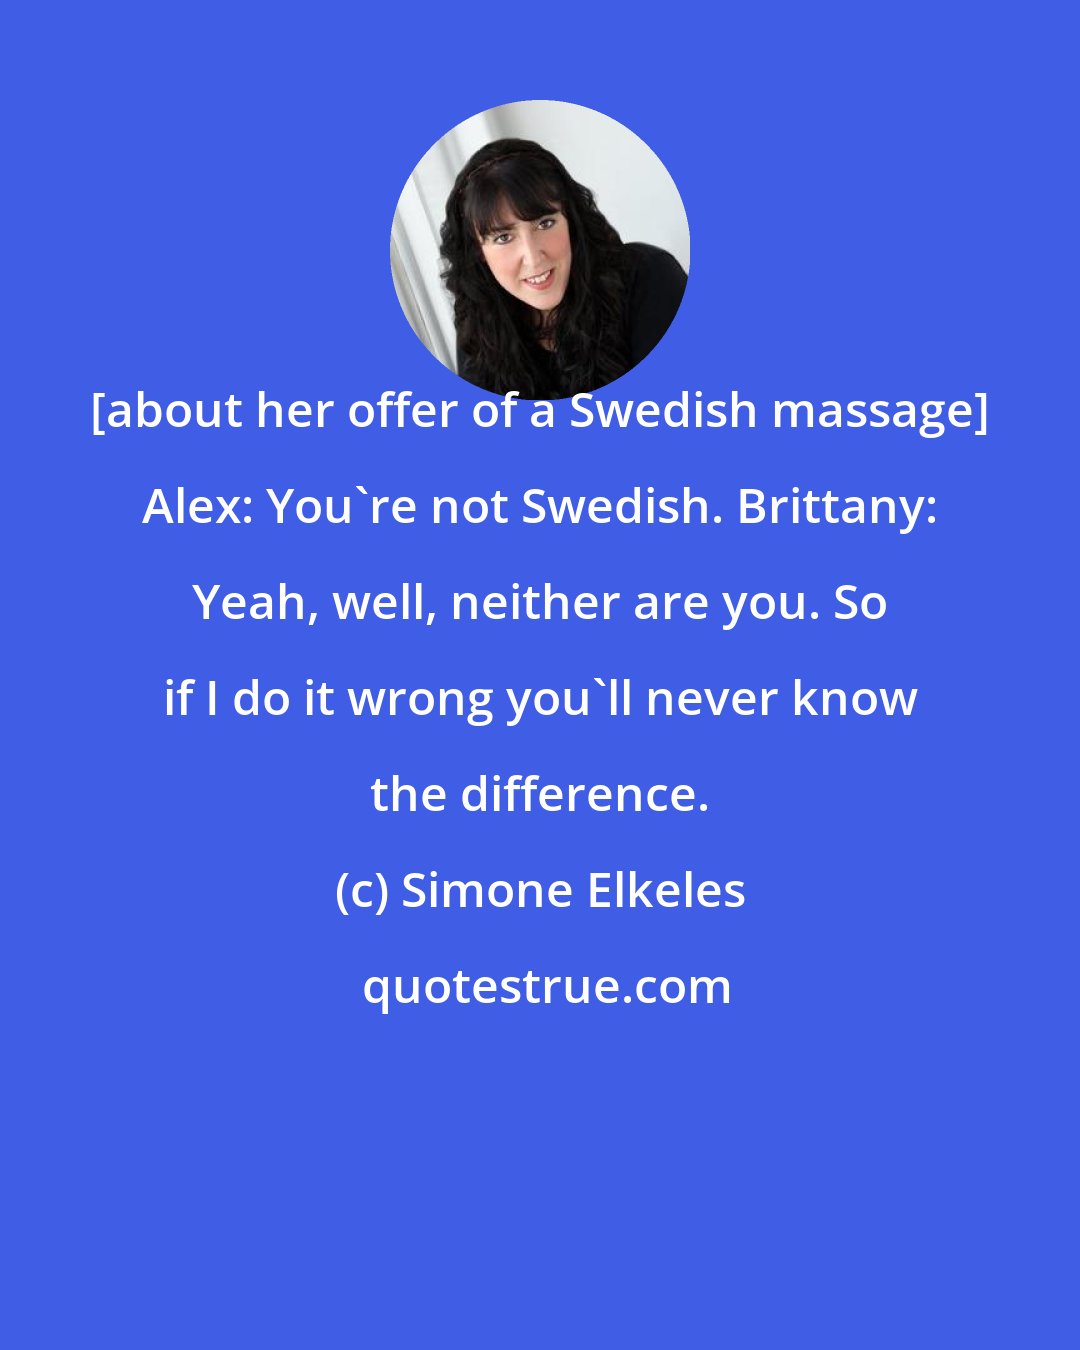 Simone Elkeles: [about her offer of a Swedish massage] Alex: You're not Swedish. Brittany: Yeah, well, neither are you. So if I do it wrong you'll never know the difference.